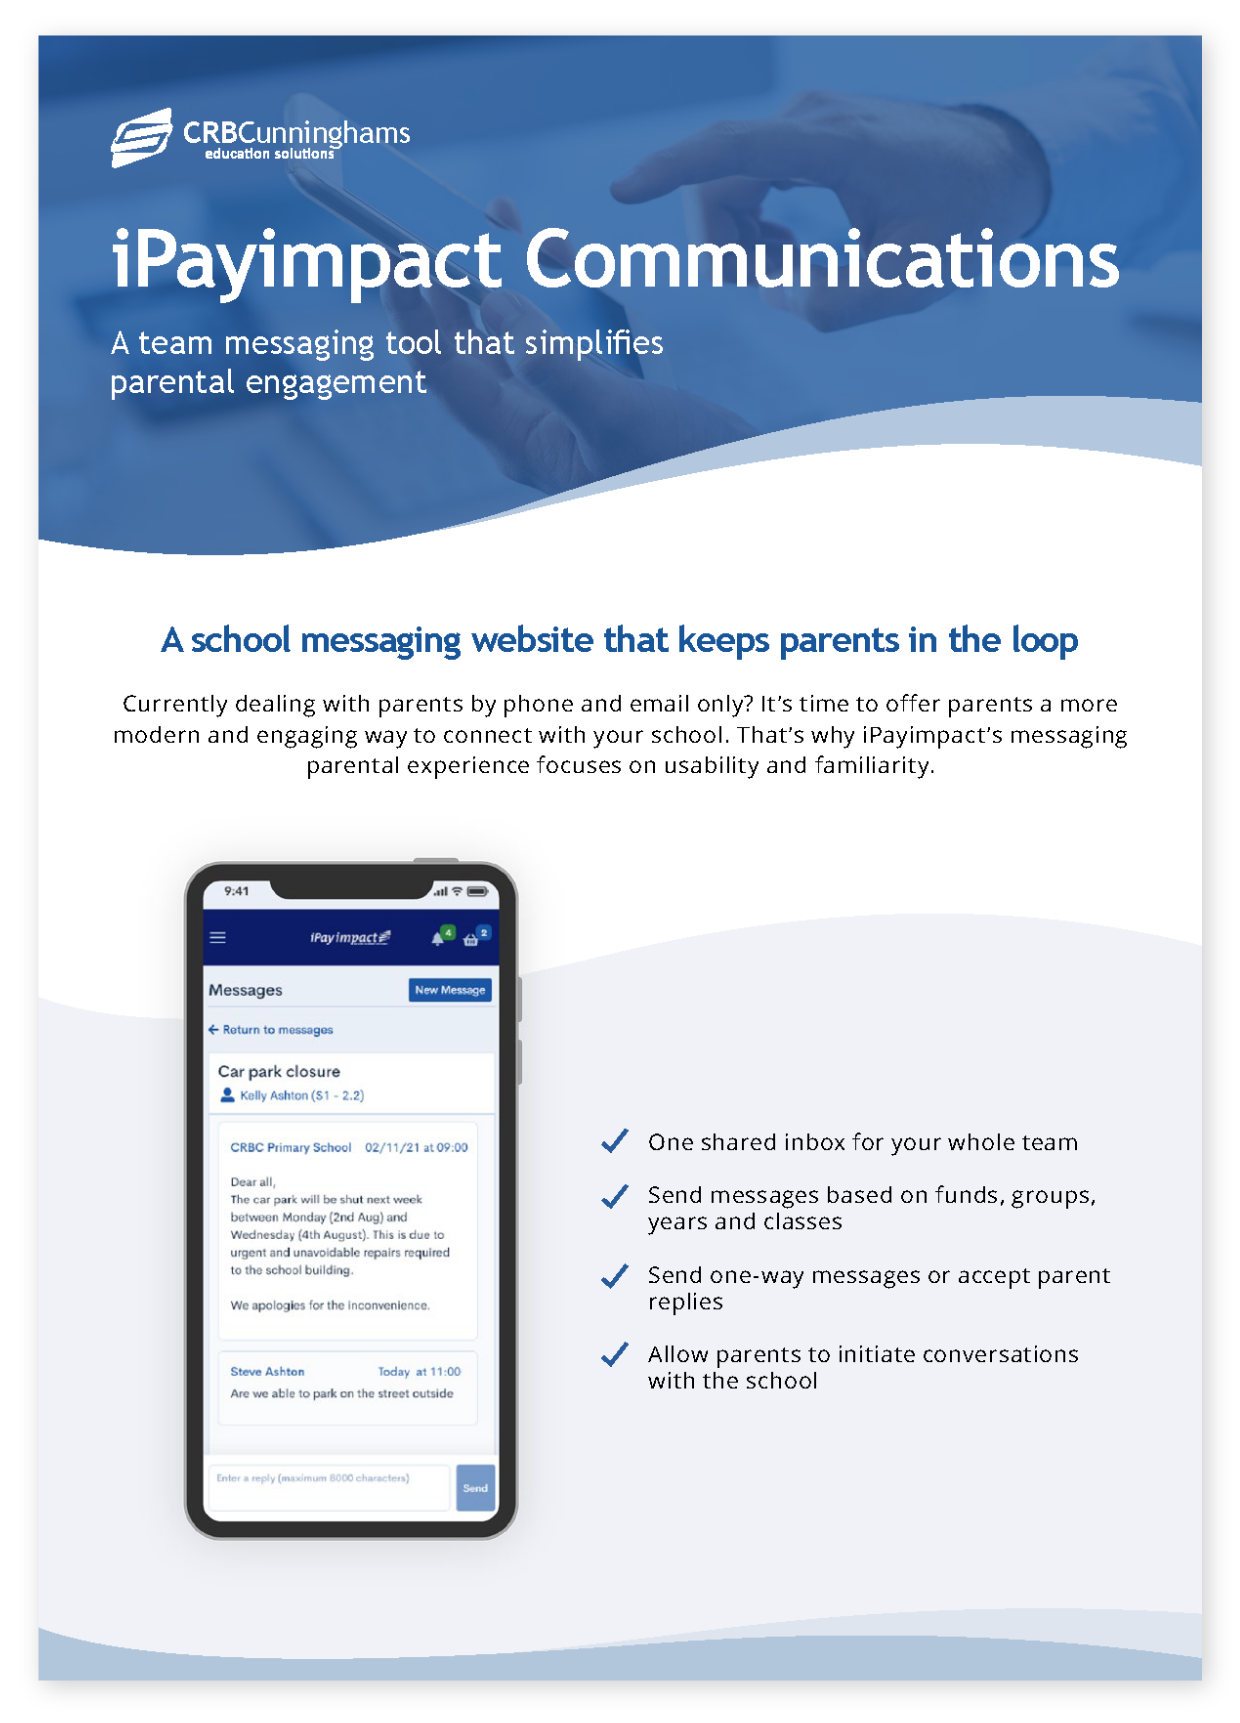 ipayimpact-communications-product-brochure 